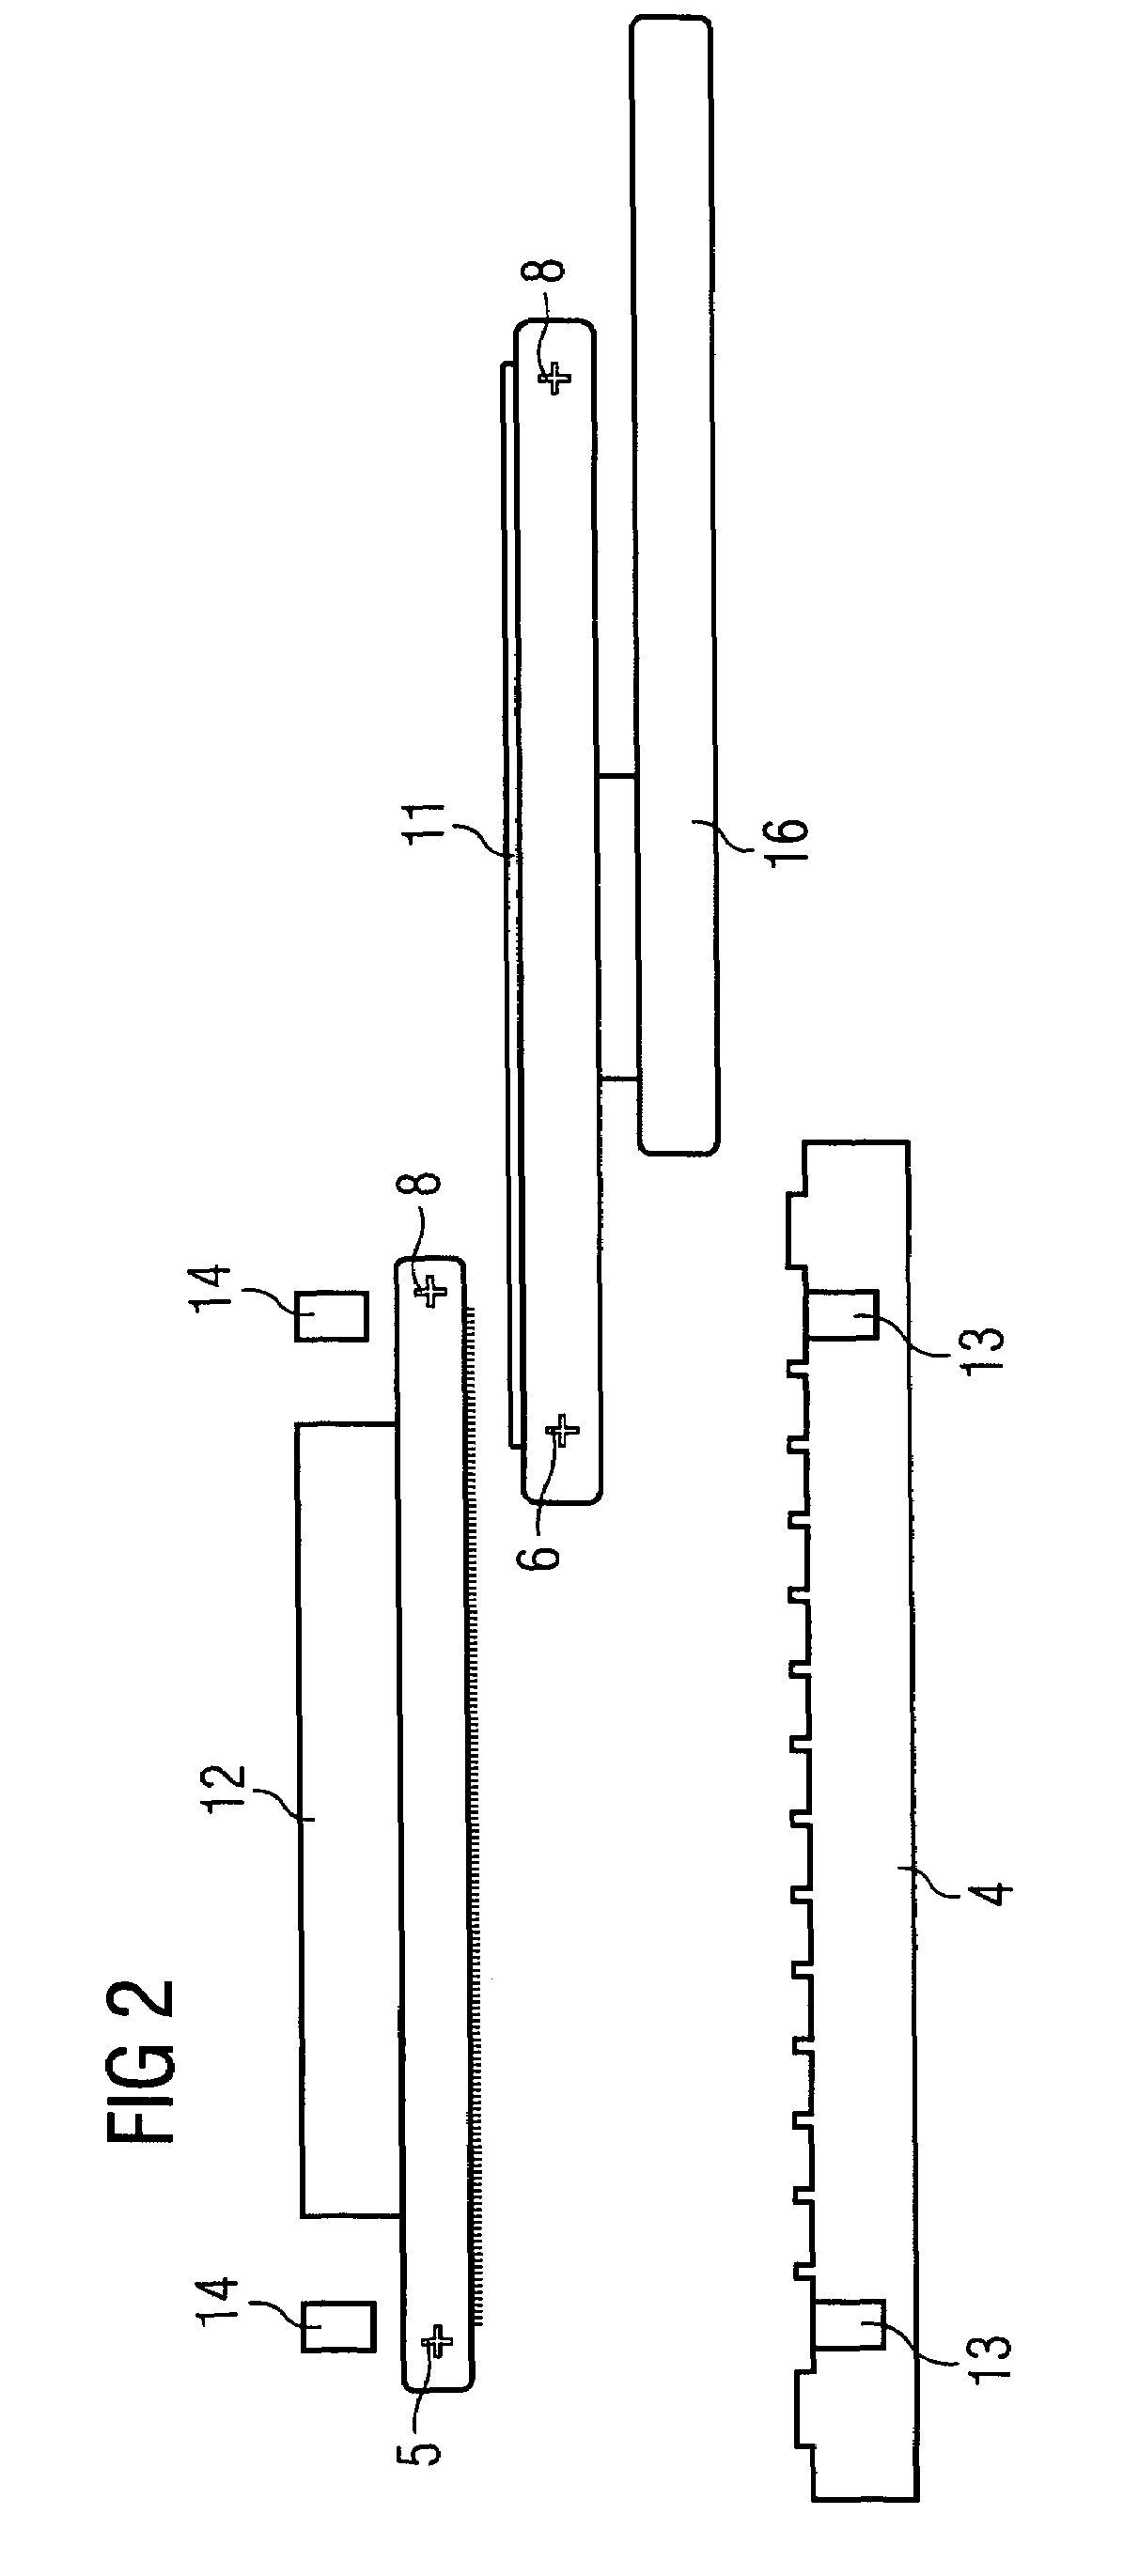 Arrangement for transferring information/structures to wafers